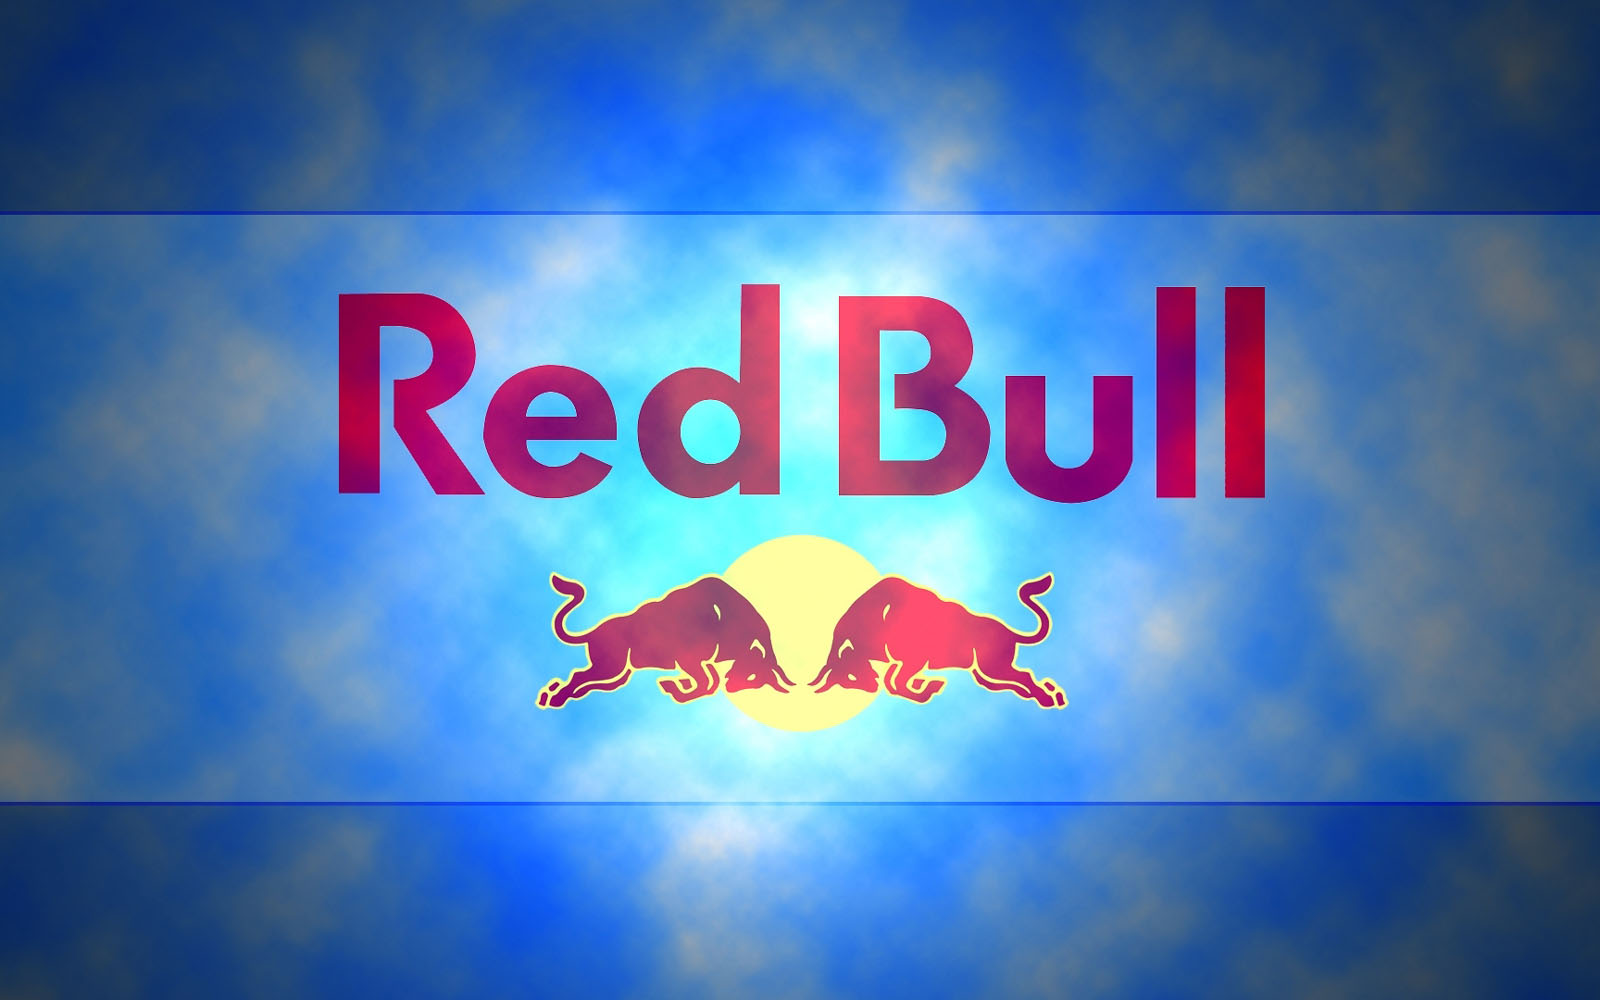 Tag Red Bull Wallpaper Background Photos Image Andpictures For